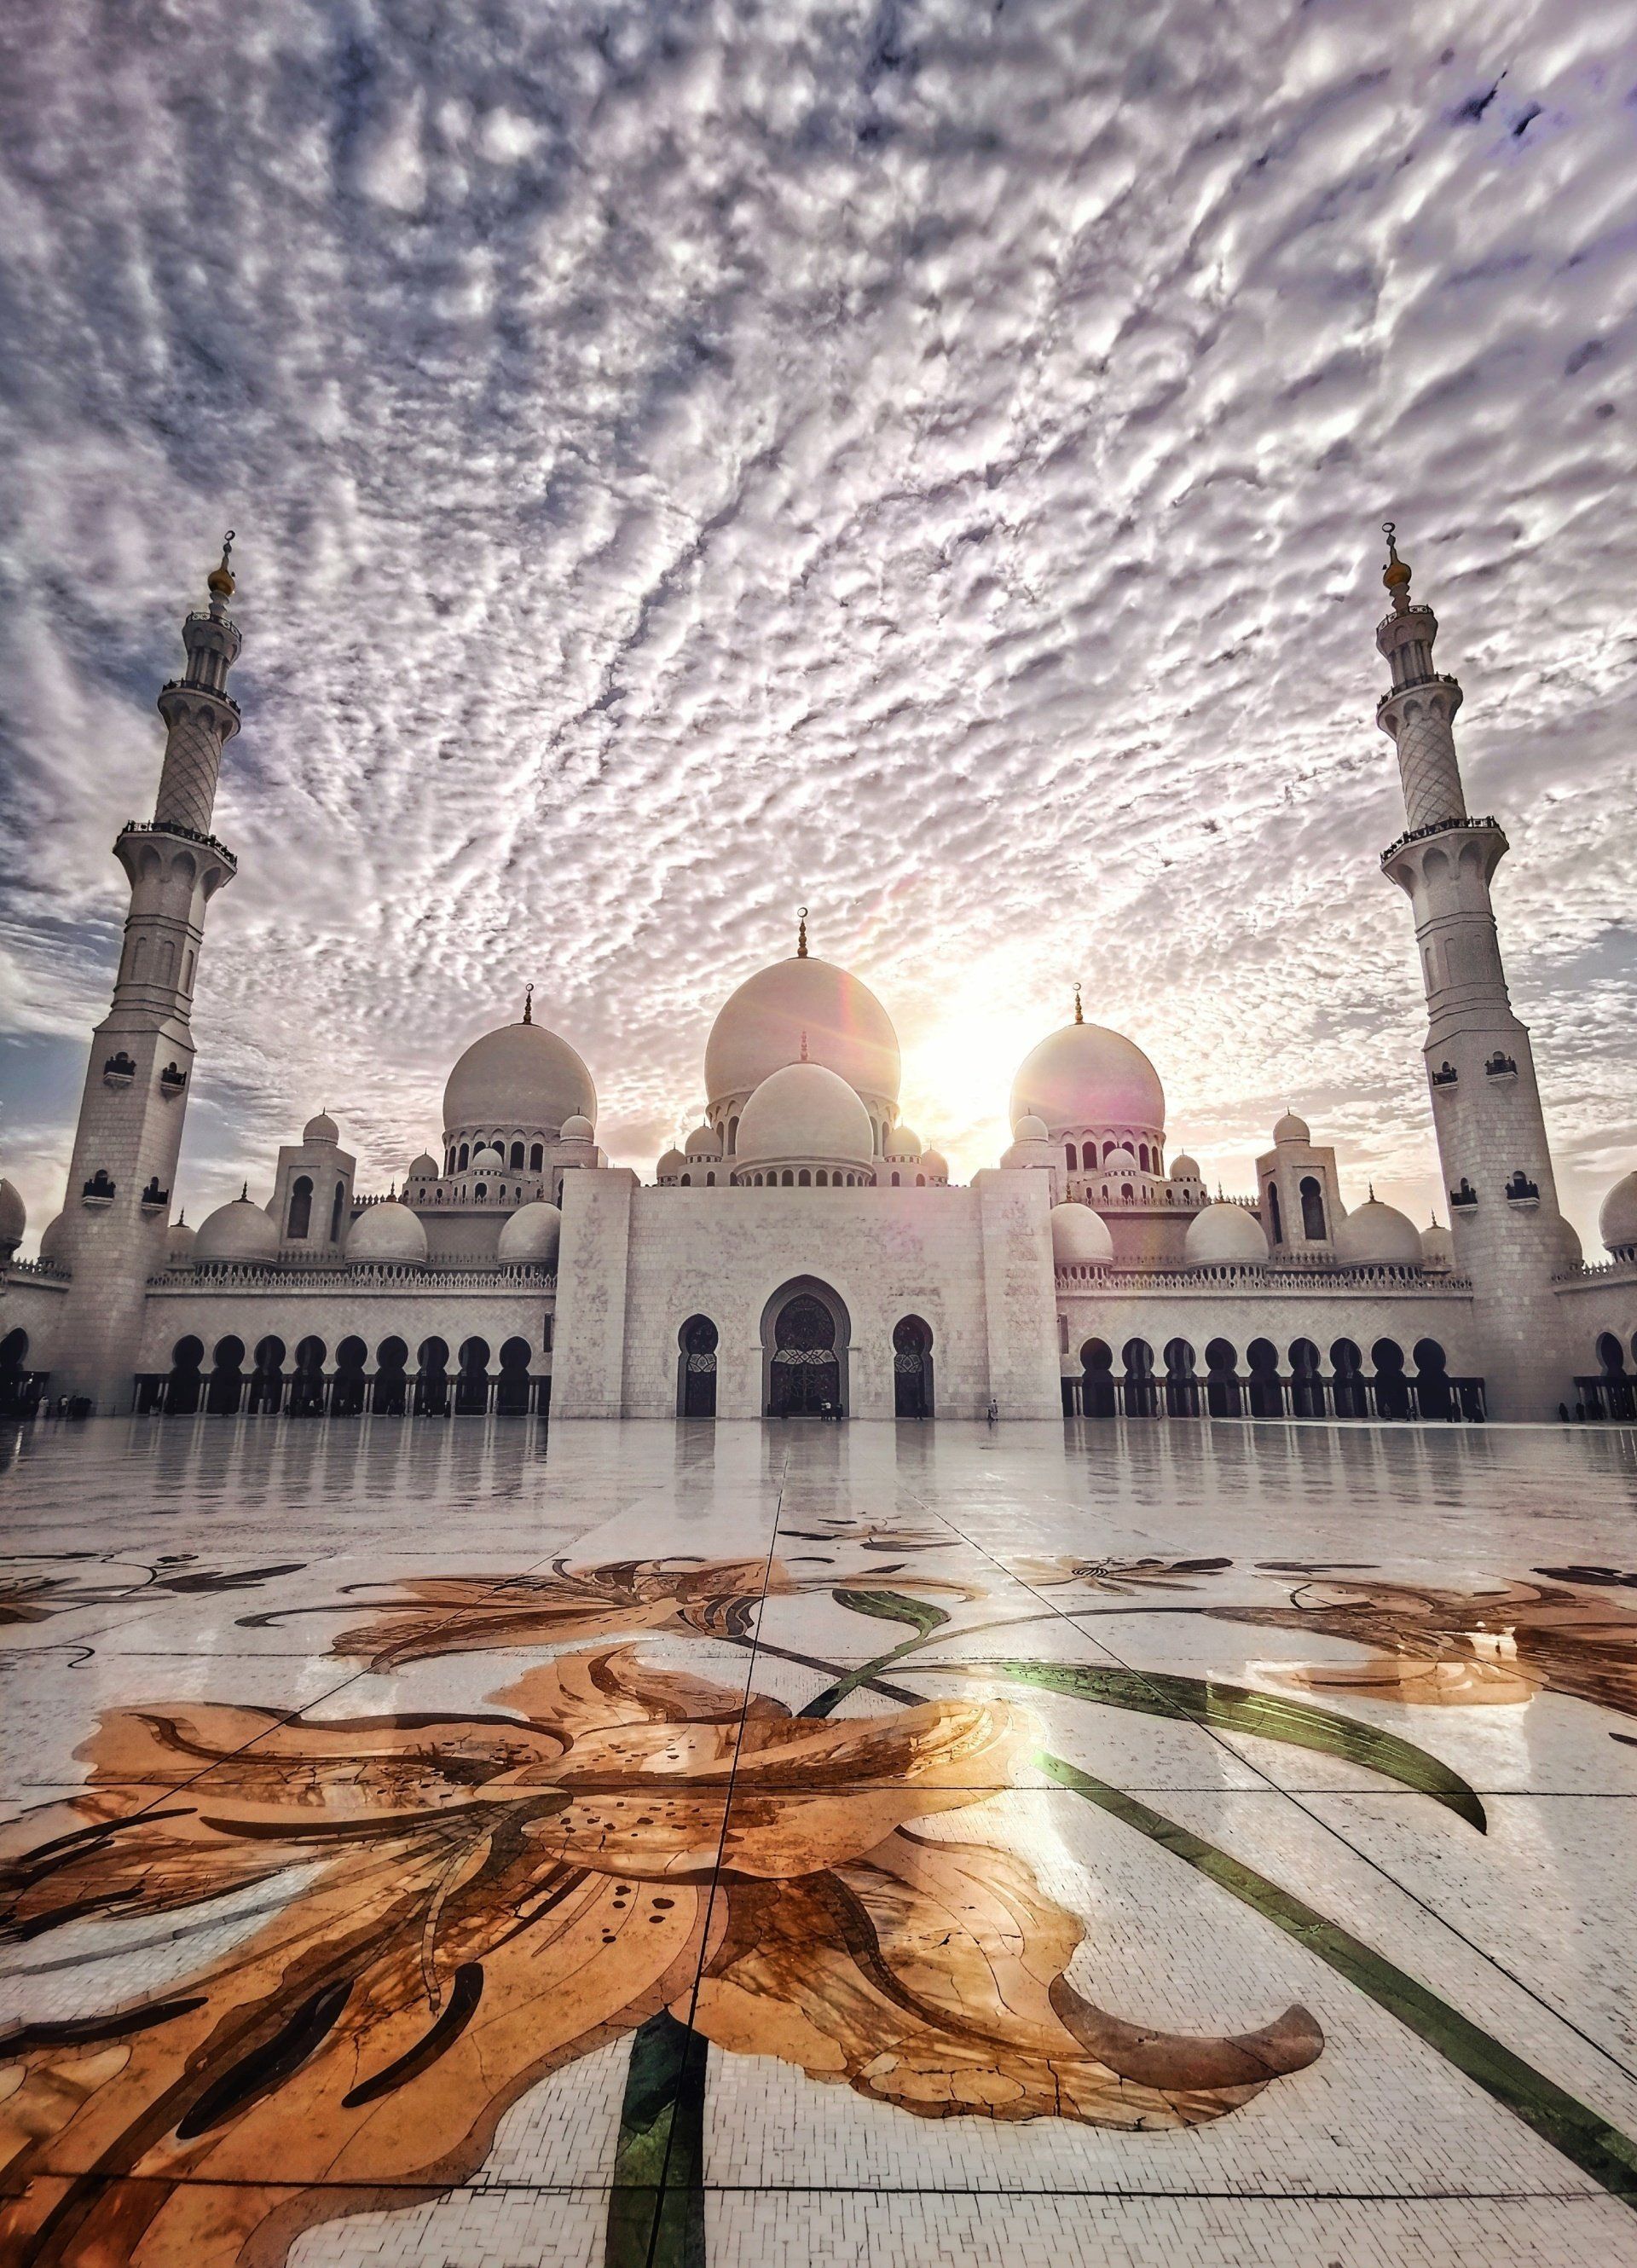 A mosque with the sun shining through the clouds